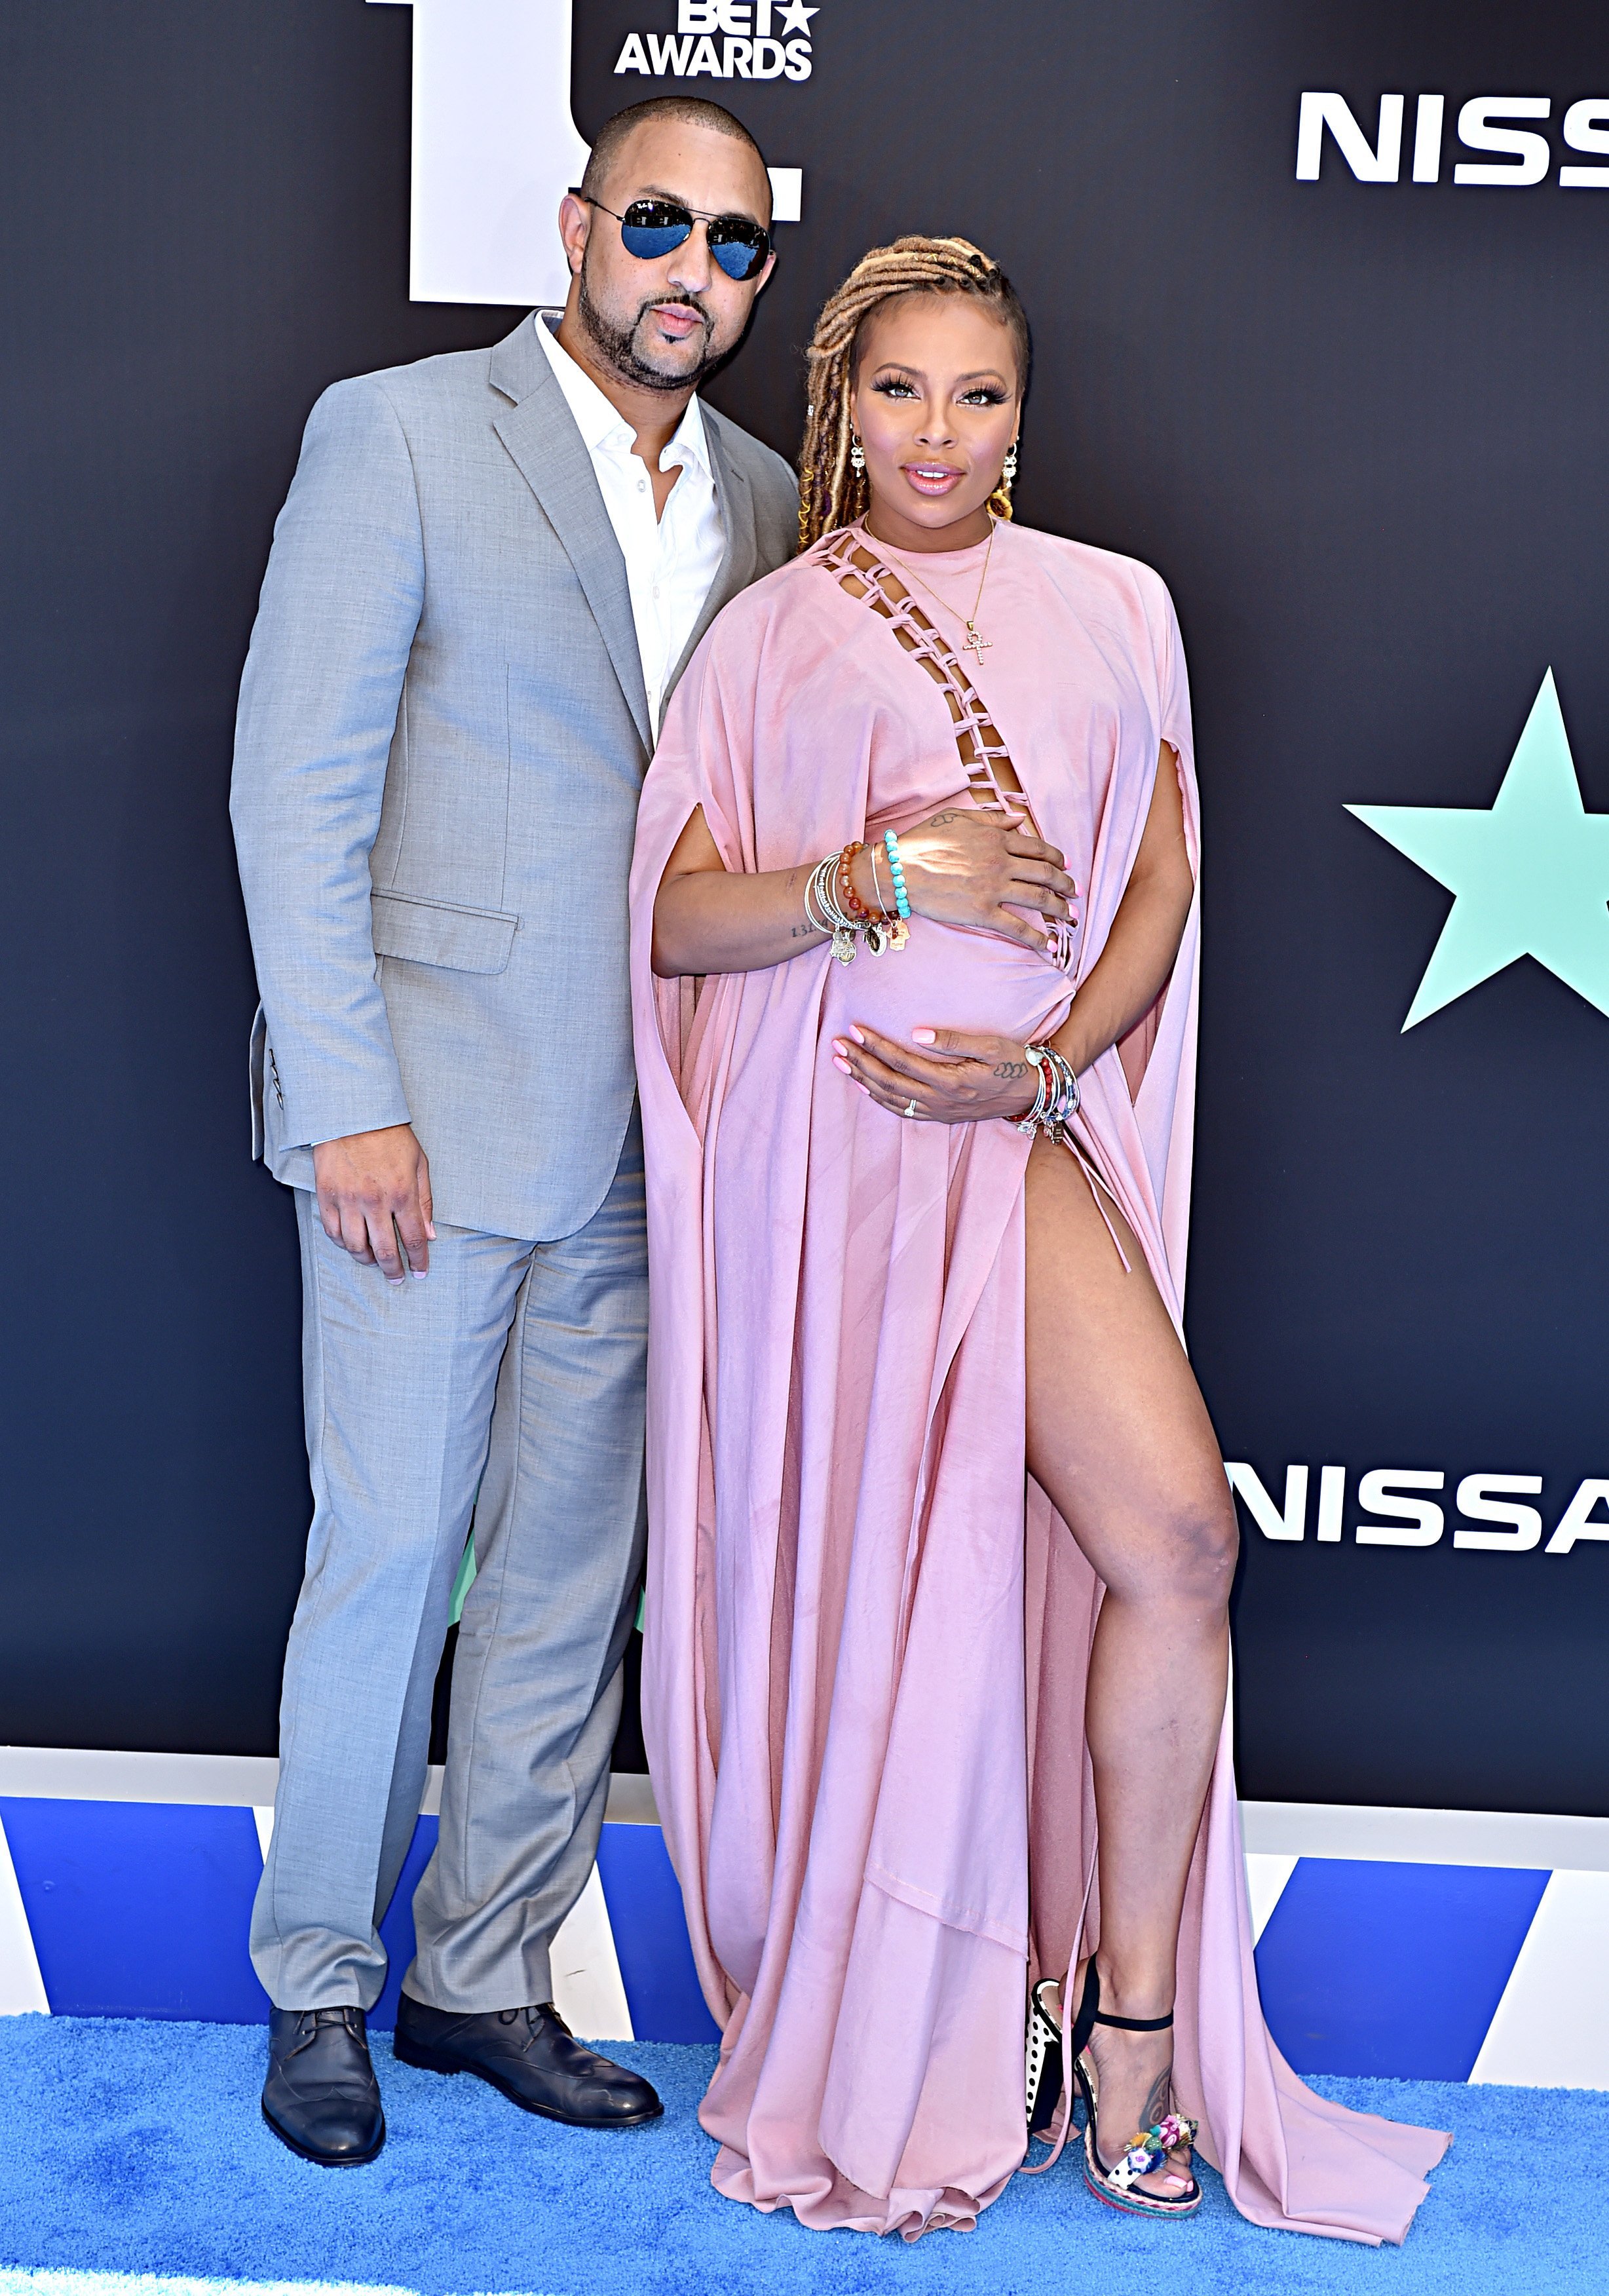 Eva Marcille & husband, Michael Sterling at the BET Awards on June 23, 2019 in California | Photo: Getty Images